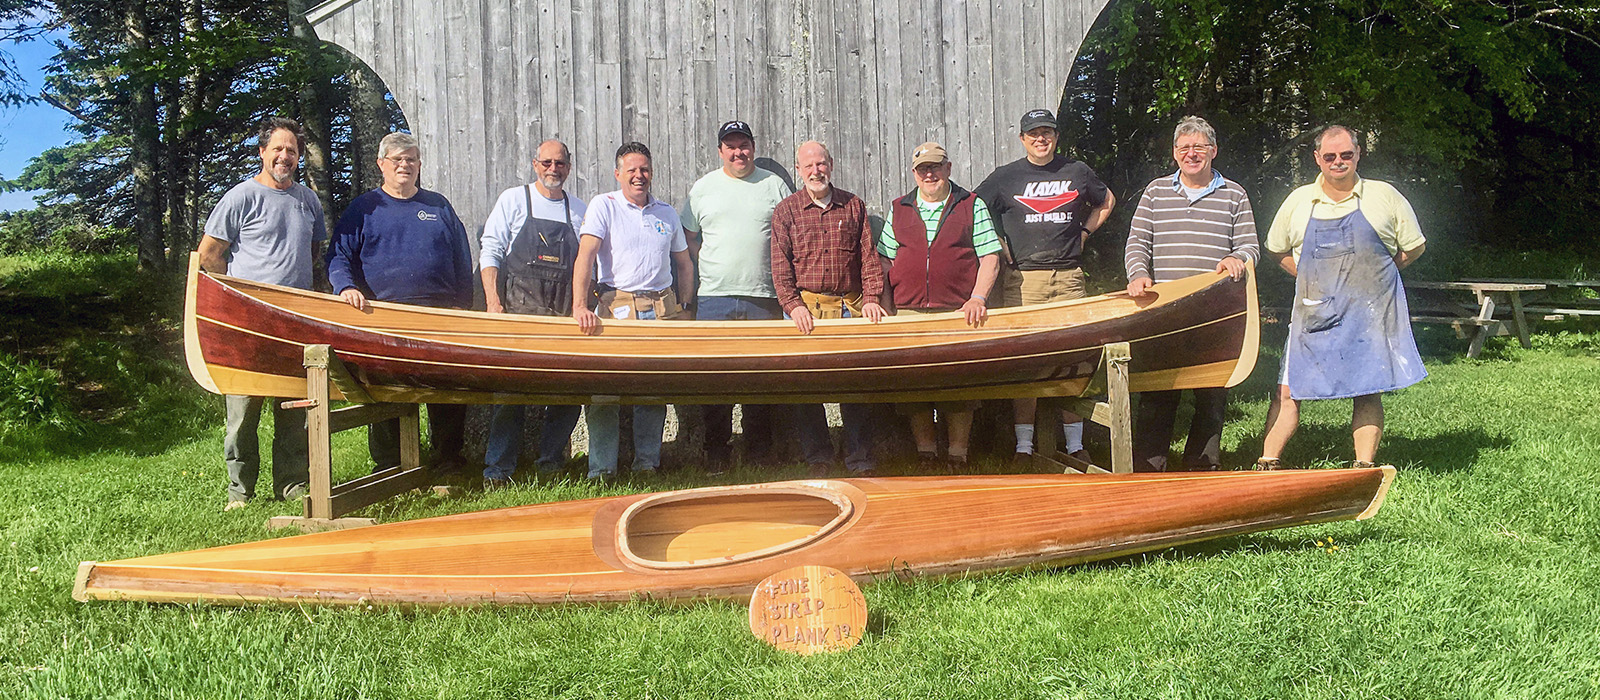 Fine Strip Planked Boats Class @ WoodenBoat